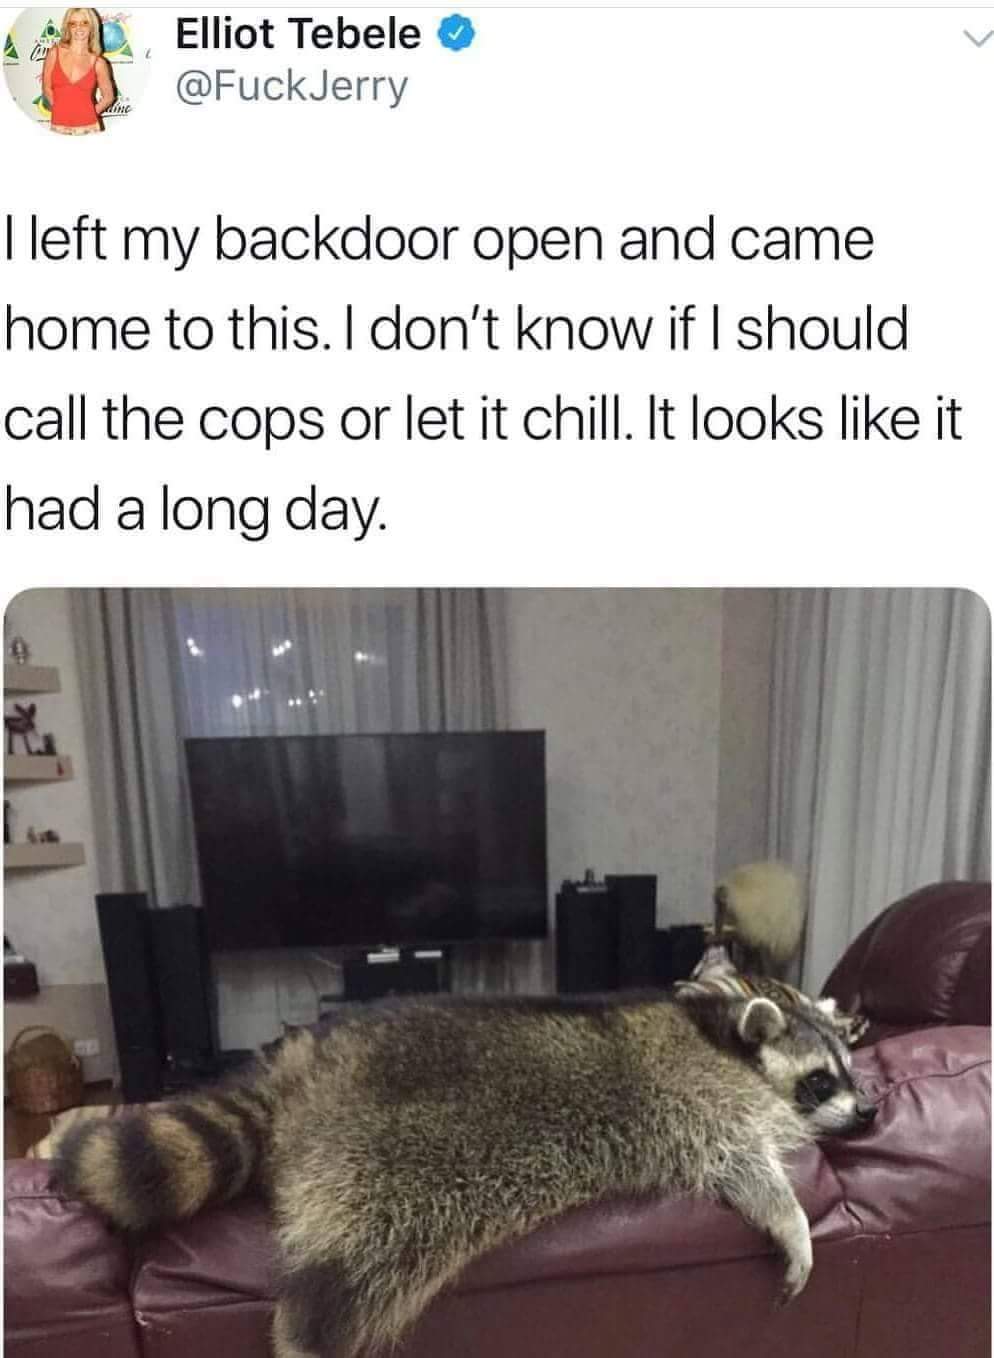 memes - trash panda meme - Elliot Tebele Jerry I left my backdoor open and came home to this. I don't know if I should call the cops or let it chill. It looks it had a long day.